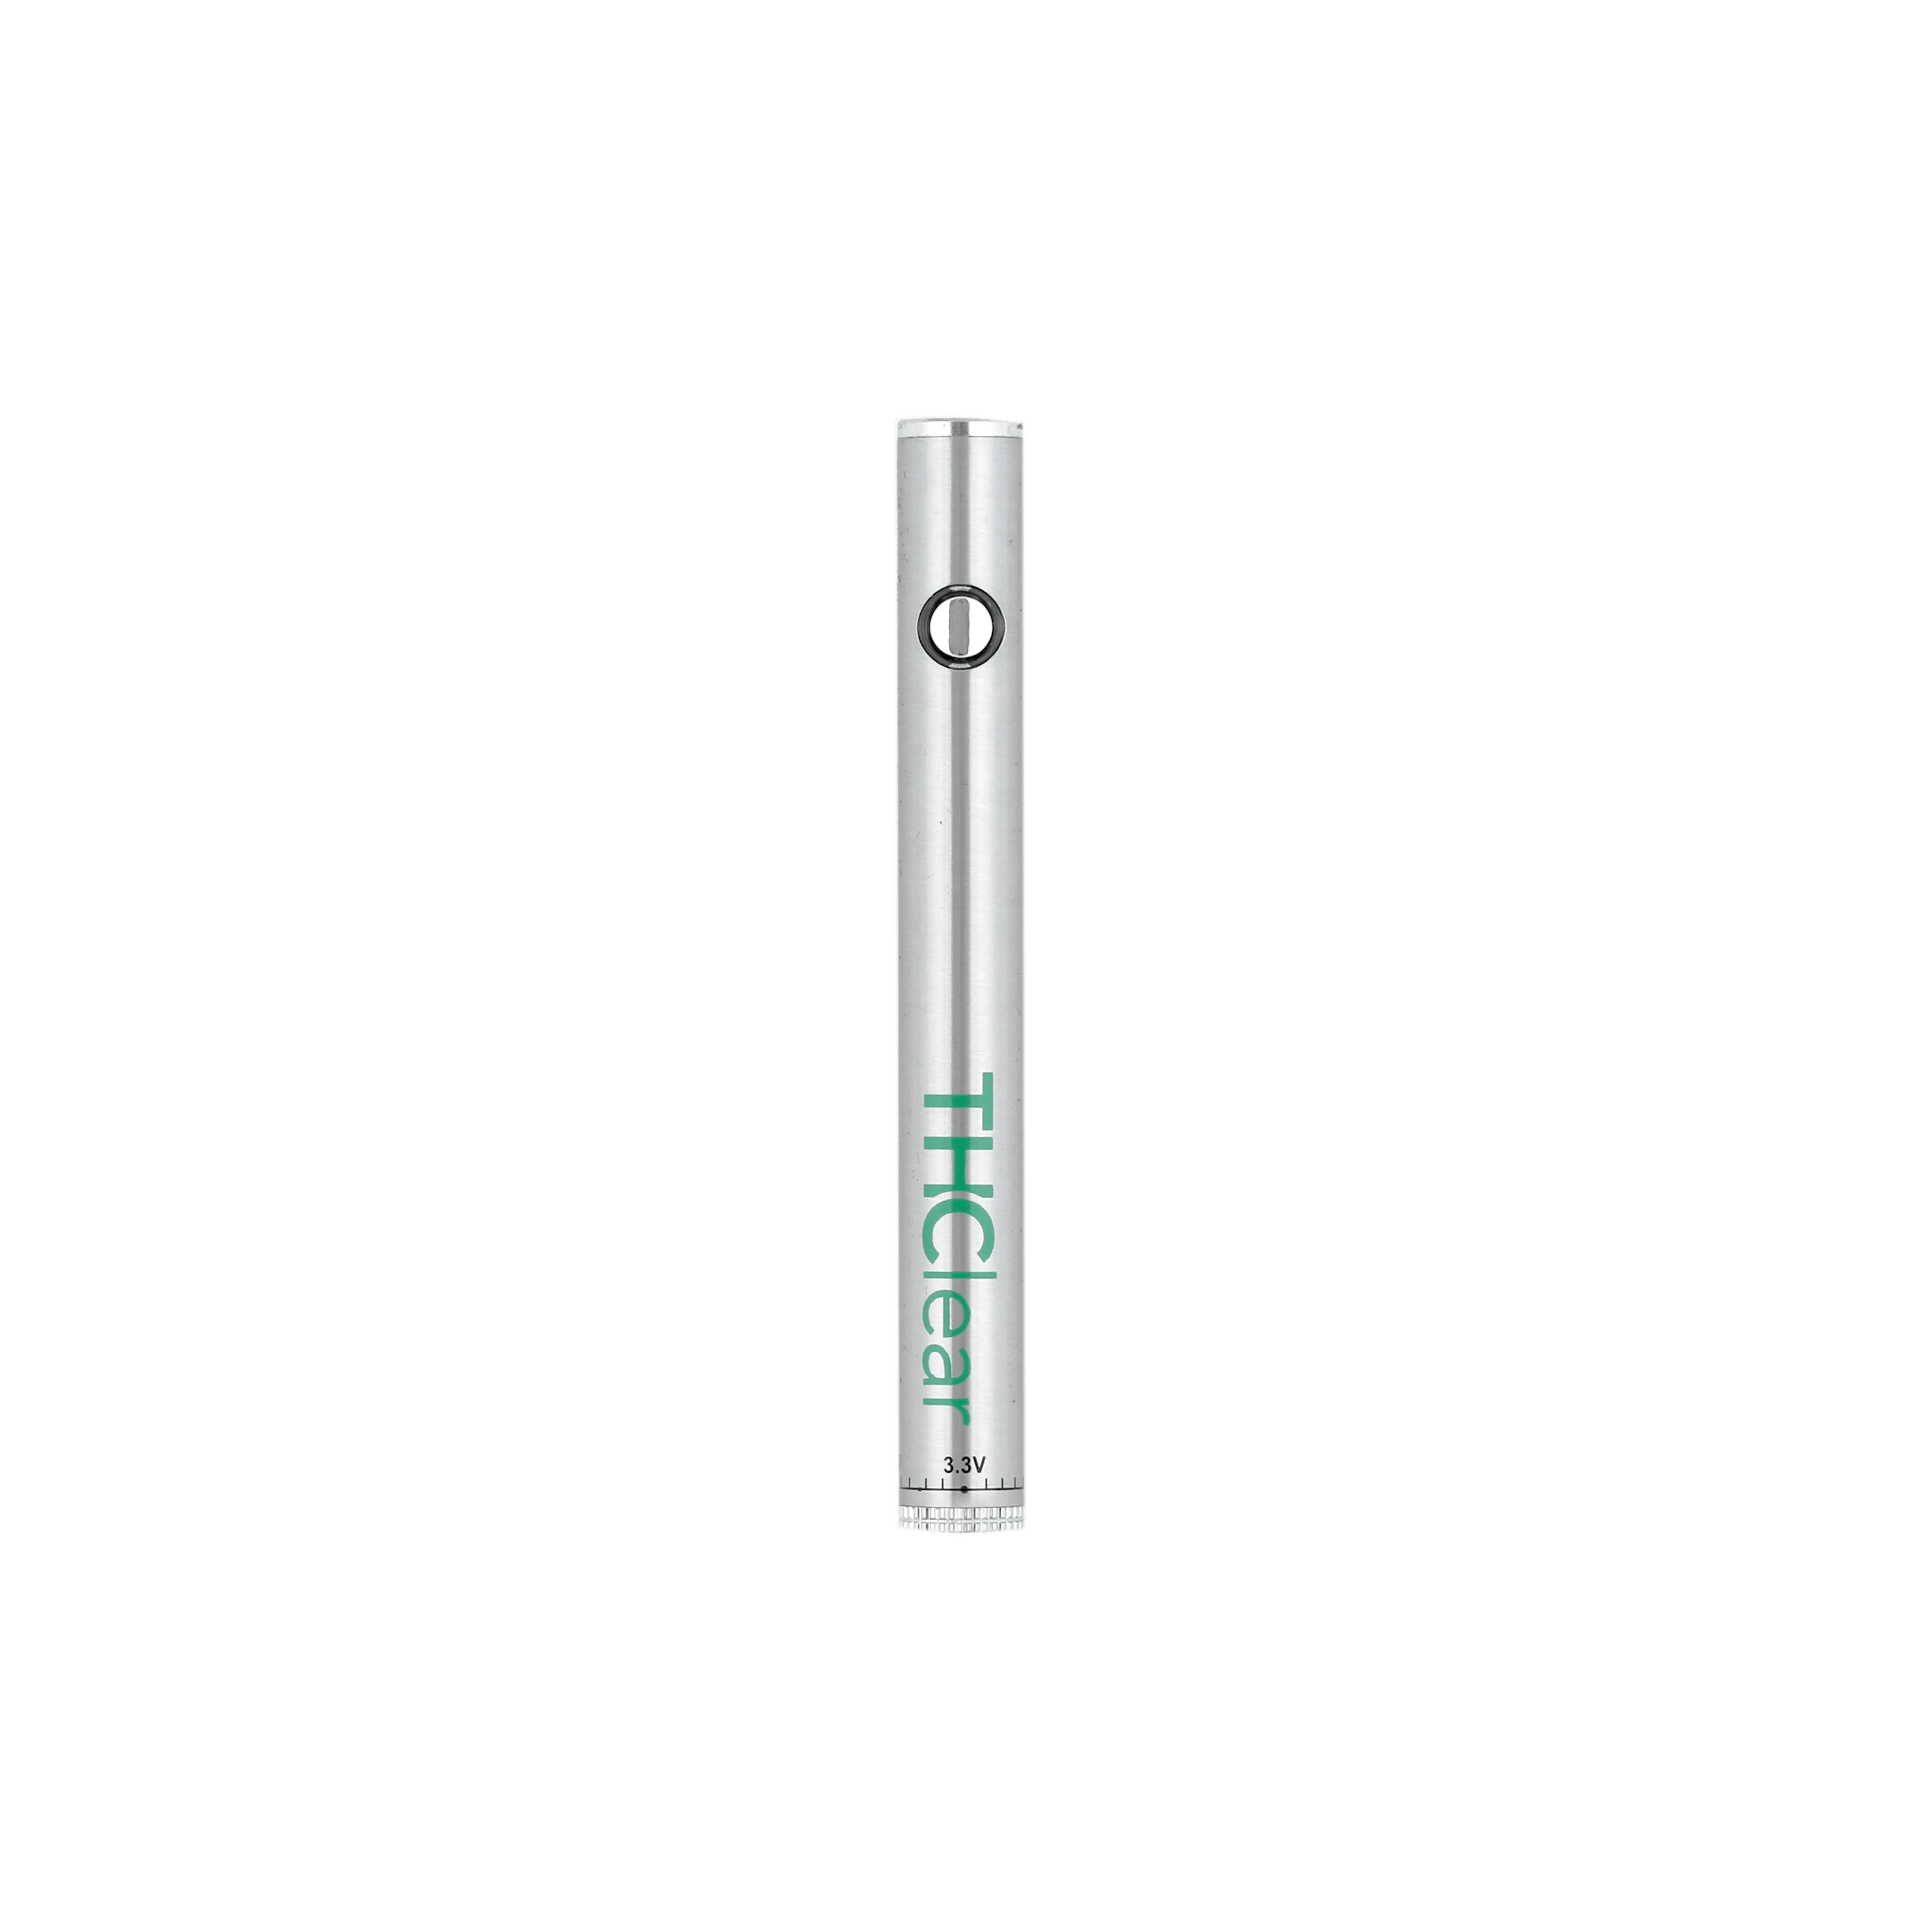 marijuana-dispensaries-the-bank-in-anaheim-battery-kit-variable-voltage-silver